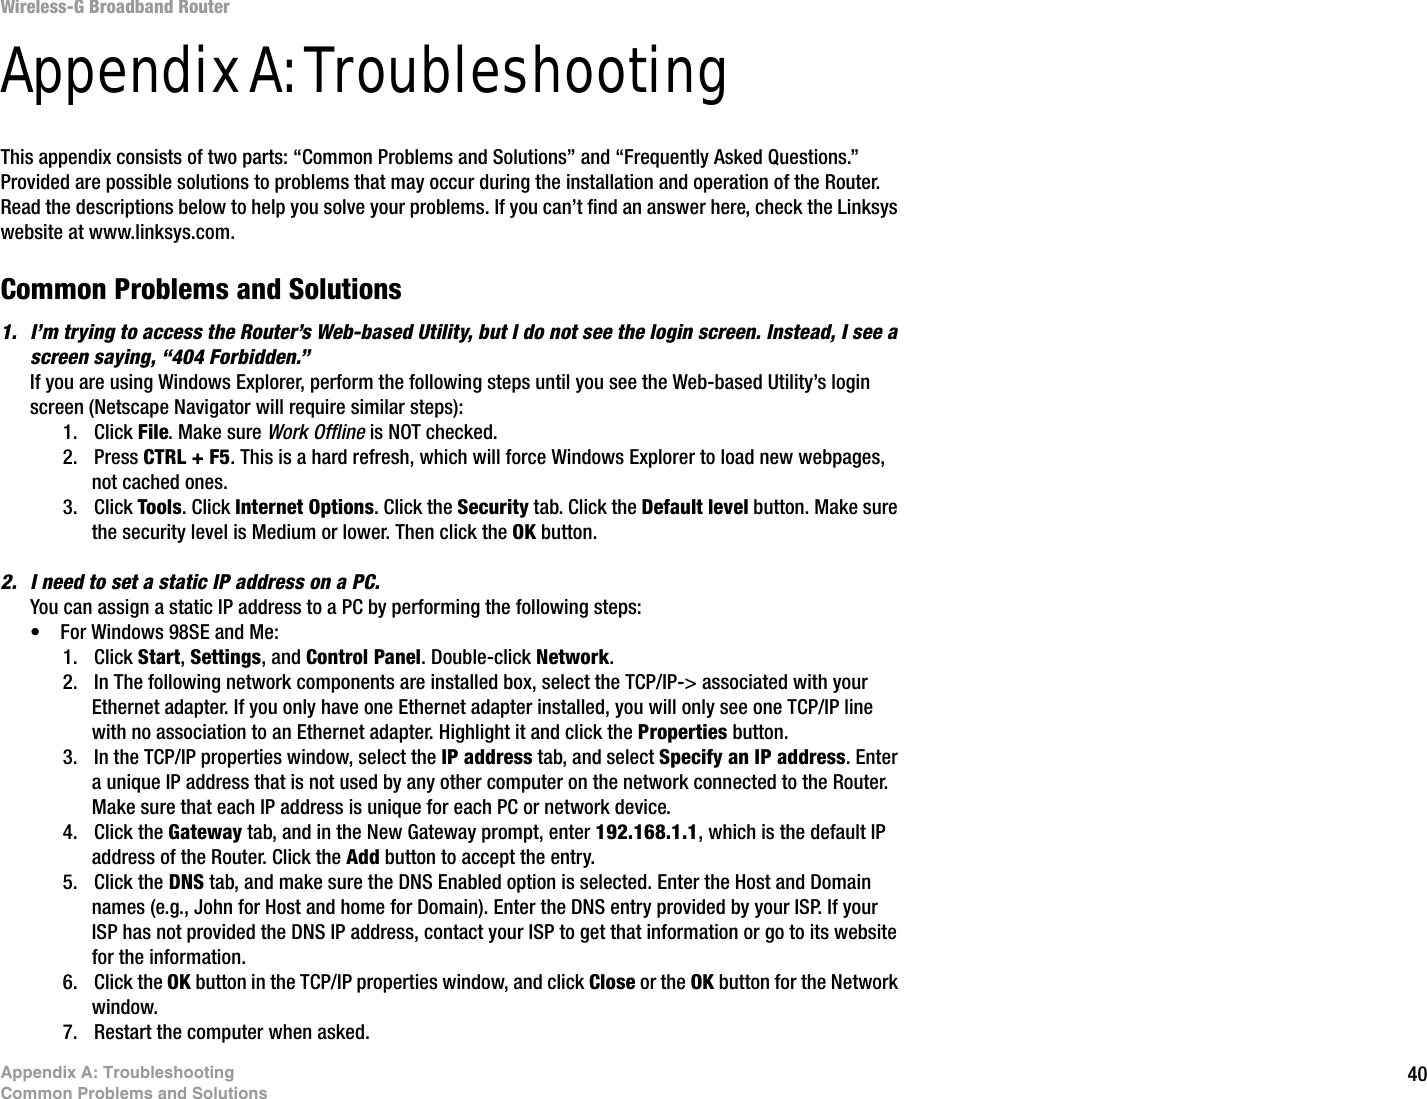 40Appendix A: TroubleshootingCommon Problems and SolutionsWireless-G Broadband RouterAppendix A: TroubleshootingThis appendix consists of two parts: “Common Problems and Solutions” and “Frequently Asked Questions.” Provided are possible solutions to problems that may occur during the installation and operation of the Router. Read the descriptions below to help you solve your problems. If you can’t find an answer here, check the Linksys website at www.linksys.com.Common Problems and Solutions1. I’m trying to access the Router’s Web-based Utility, but I do not see the login screen. Instead, I see a screen saying, “404 Forbidden.”If you are using Windows Explorer, perform the following steps until you see the Web-based Utility’s login screen (Netscape Navigator will require similar steps):1. Click File. Make sure Work Offline is NOT checked.2. Press CTRL + F5. This is a hard refresh, which will force Windows Explorer to load new webpages, not cached ones.3. Click Tools. Click Internet Options. Click the Security tab. Click the Default level button. Make sure the security level is Medium or lower. Then click the OK button.2. I need to set a static IP address on a PC.You can assign a static IP address to a PC by performing the following steps:• For Windows 98SE and Me:1. Click Start, Settings, and Control Panel. Double-click Network.2. In The following network components are installed box, select the TCP/IP-&gt; associated with your Ethernet adapter. If you only have one Ethernet adapter installed, you will only see one TCP/IP line with no association to an Ethernet adapter. Highlight it and click the Properties button.3. In the TCP/IP properties window, select the IP address tab, and select Specify an IP address. Enter a unique IP address that is not used by any other computer on the network connected to the Router. Make sure that each IP address is unique for each PC or network device.4. Click the Gateway tab, and in the New Gateway prompt, enter 192.168.1.1, which is the default IP address of the Router. Click the Add button to accept the entry.5. Click the DNS tab, and make sure the DNS Enabled option is selected. Enter the Host and Domain names (e.g., John for Host and home for Domain). Enter the DNS entry provided by your ISP. If your ISP has not provided the DNS IP address, contact your ISP to get that information or go to its website for the information.6. Click the OK button in the TCP/IP properties window, and click Close or the OK button for the Network window.7. Restart the computer when asked.